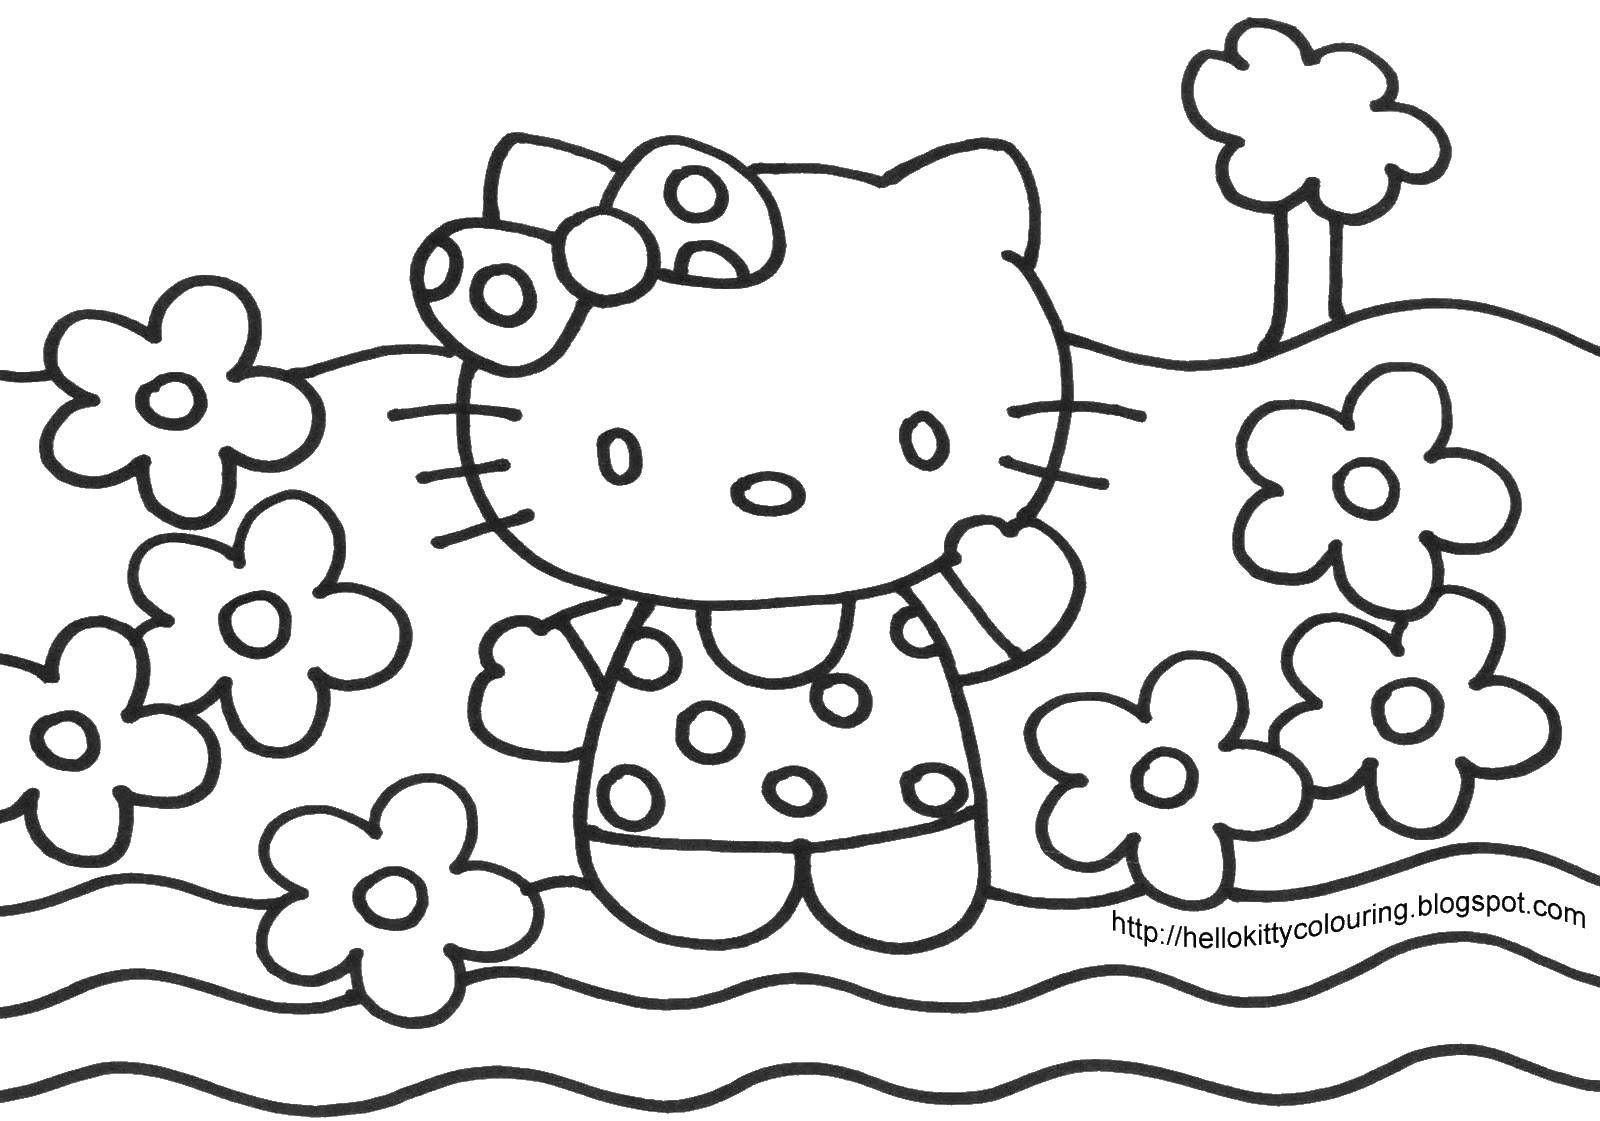 Coloring Hello kitty on a flower meadow. Category Hello Kitty. Tags:  Hello kitty, flower meadow.